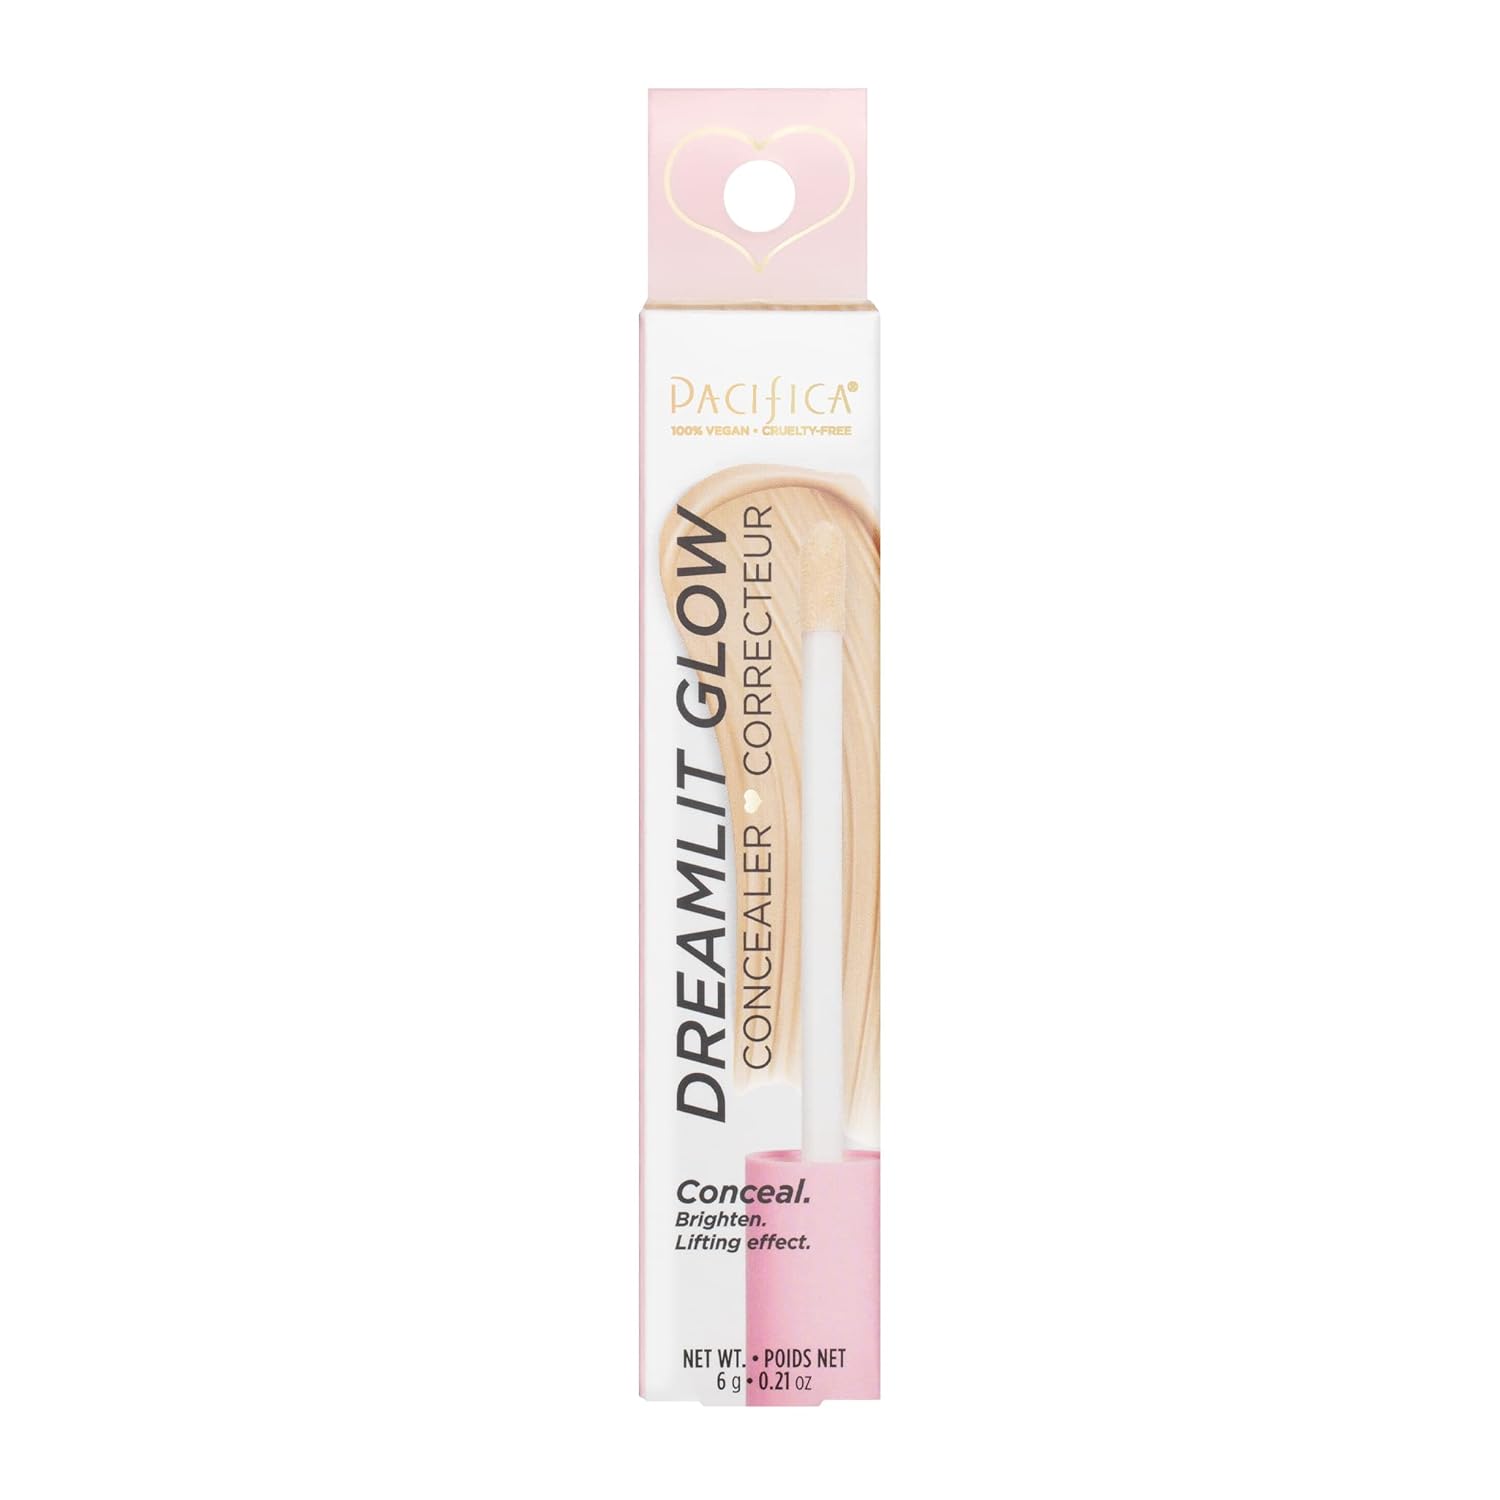 Pacifica Beauty, DreamLit Glow Concealer - Shade 09, Multi-Use Concealer, Conceals, Corrects, Covers, Puffy Eyes and Dark Circles Treatment, Plant-Based Formula, Lightweight, Long Lasting, Vegan : Beauty & Personal Care